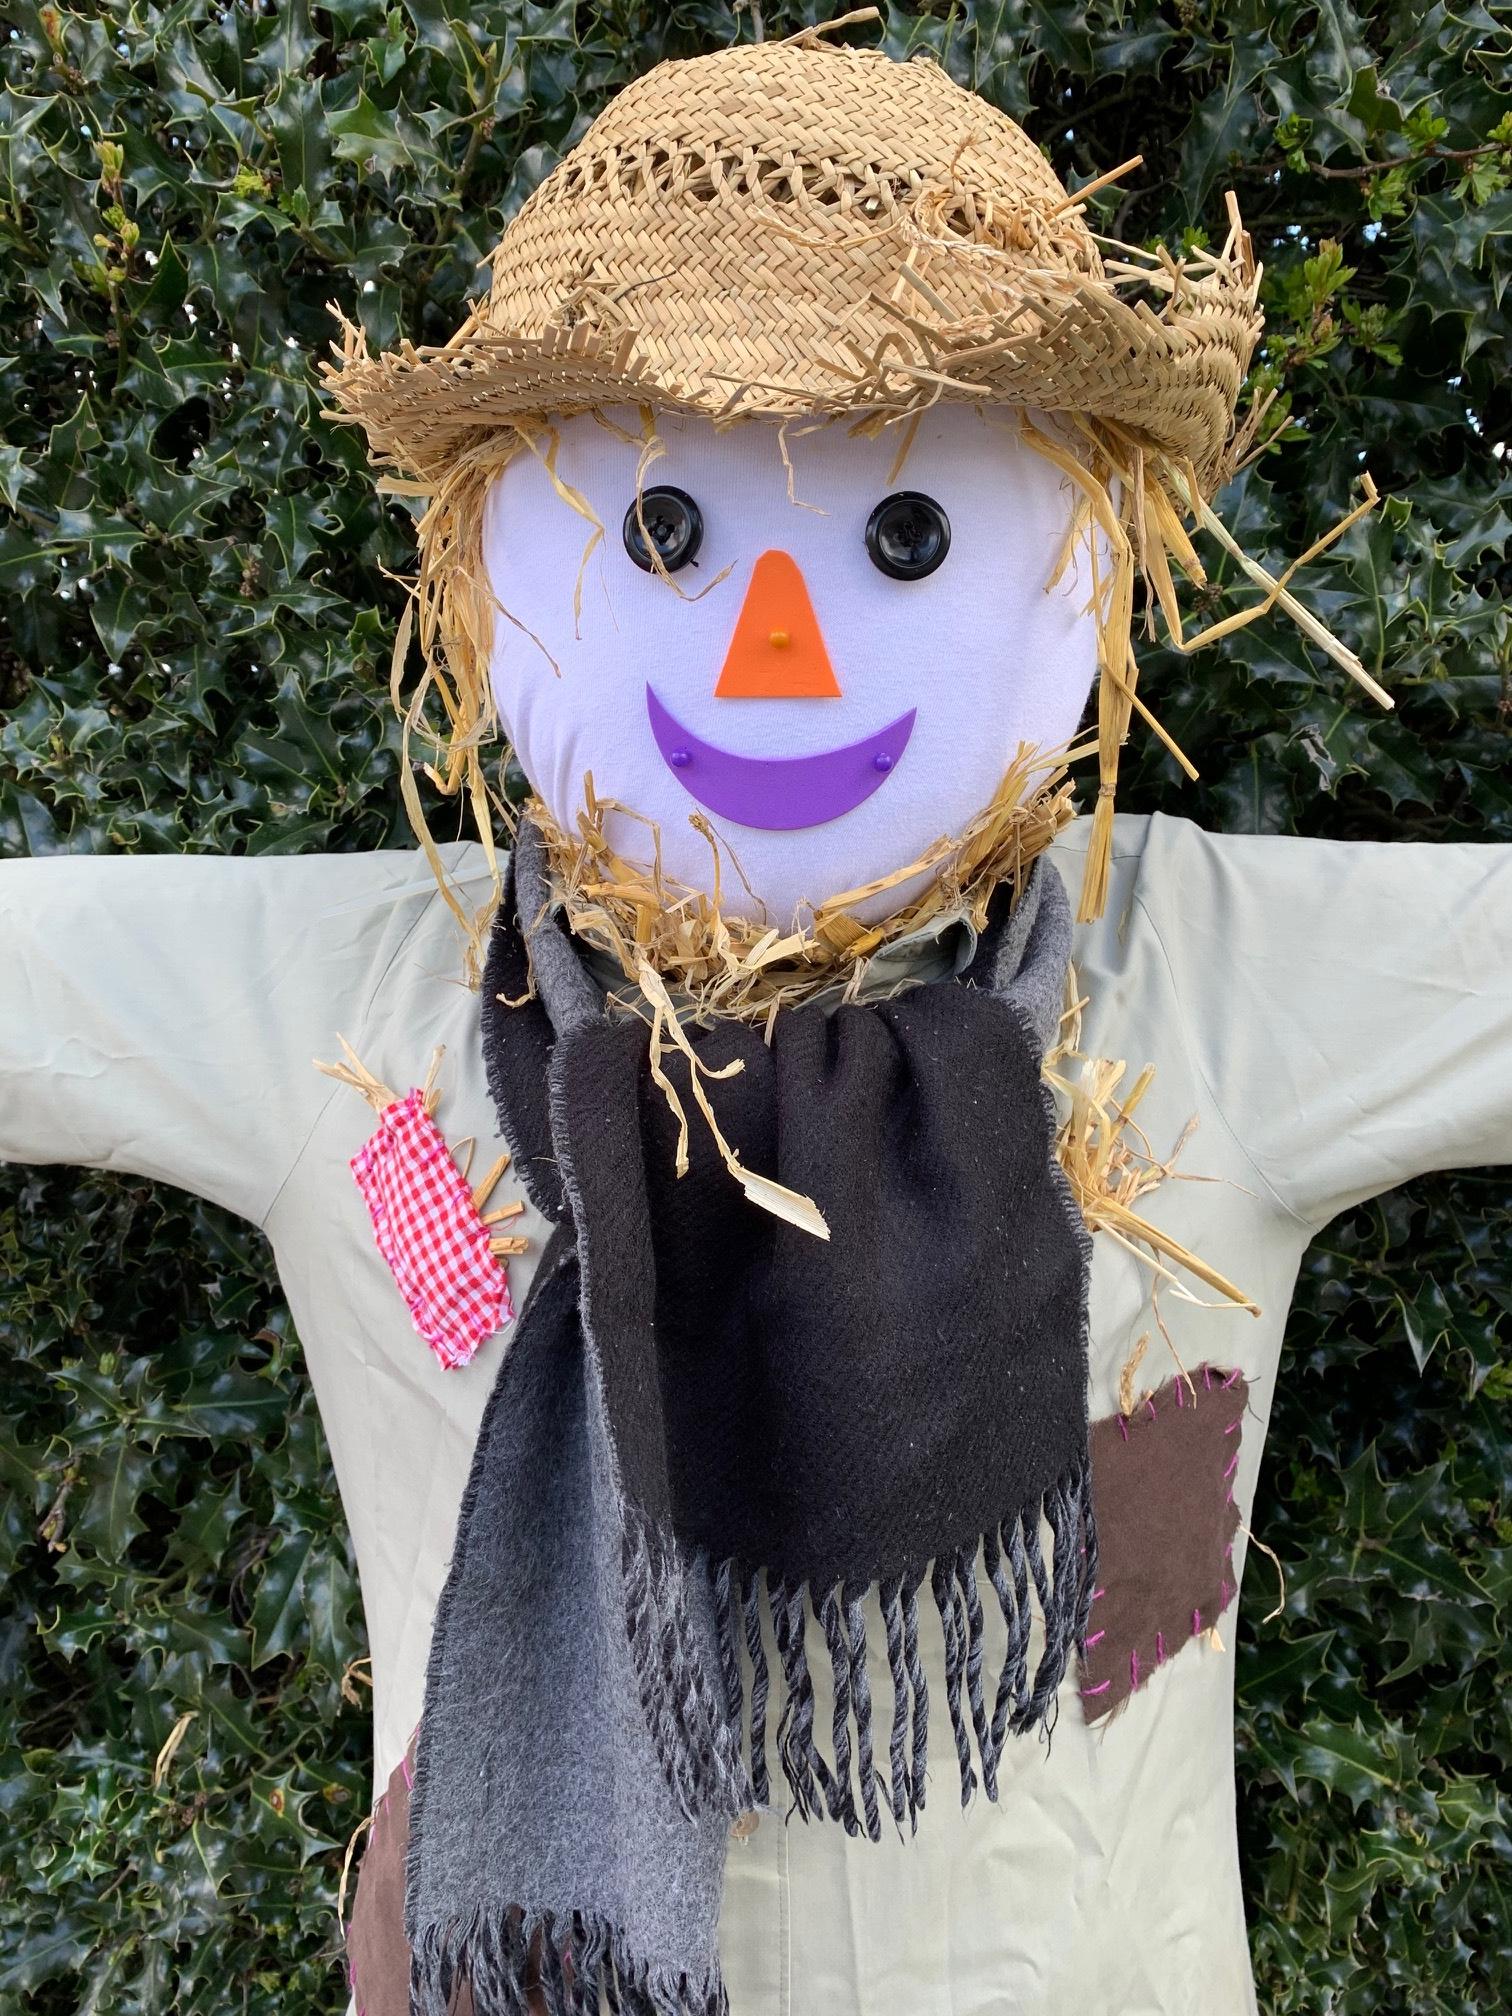 There are lots of scarecrows on show in Stokenchurch